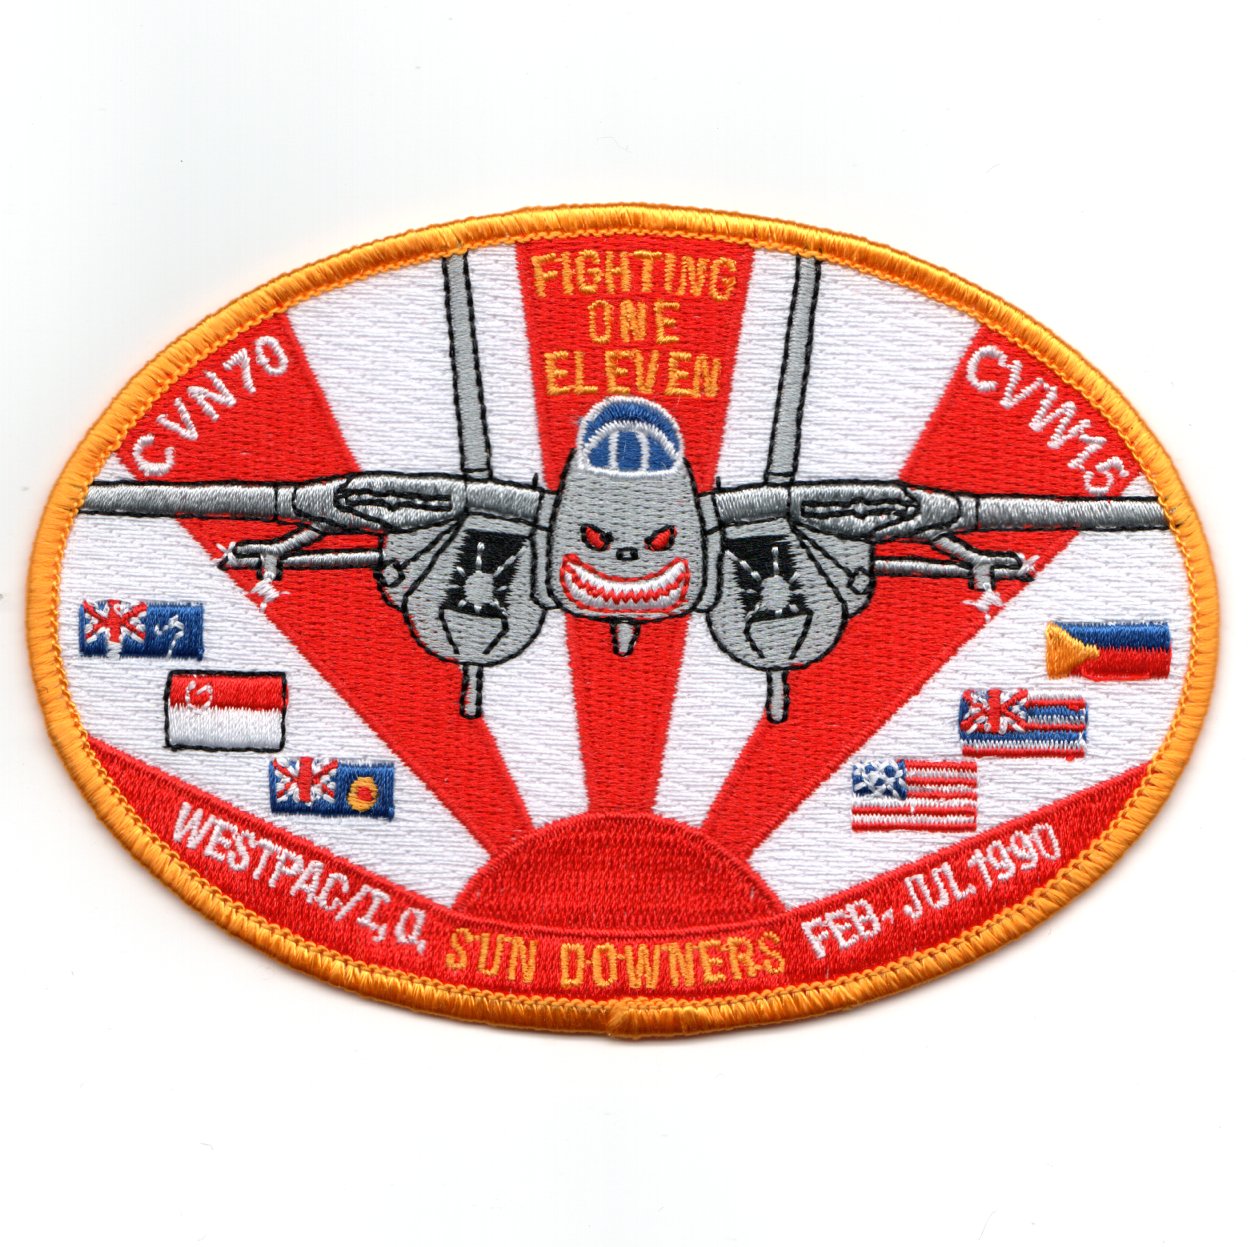 VF-111 SUN DOWNERS #1 patch